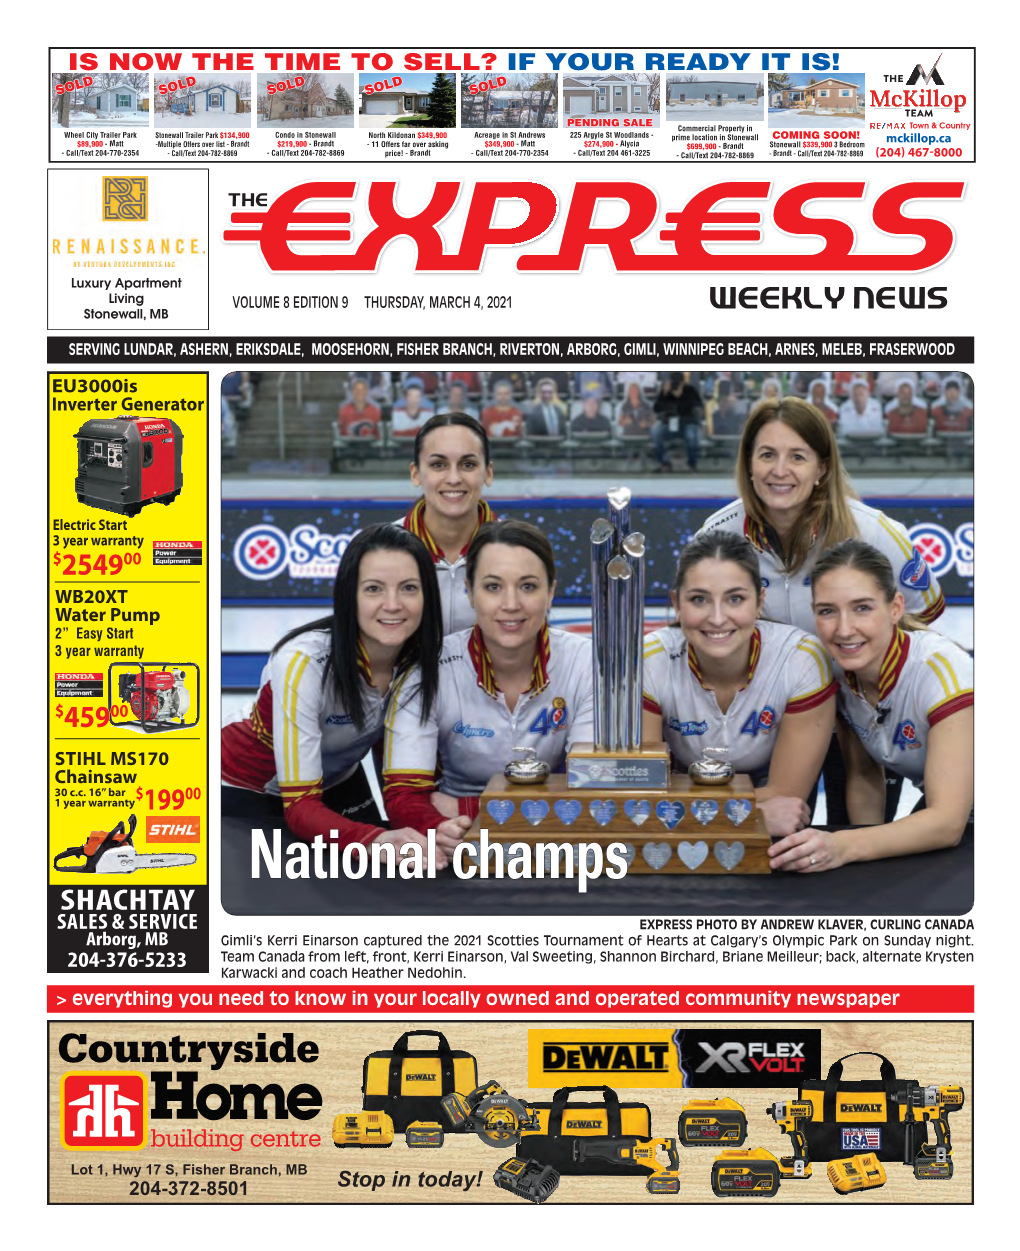 Proofed-Express Weekly News 030421.Indd